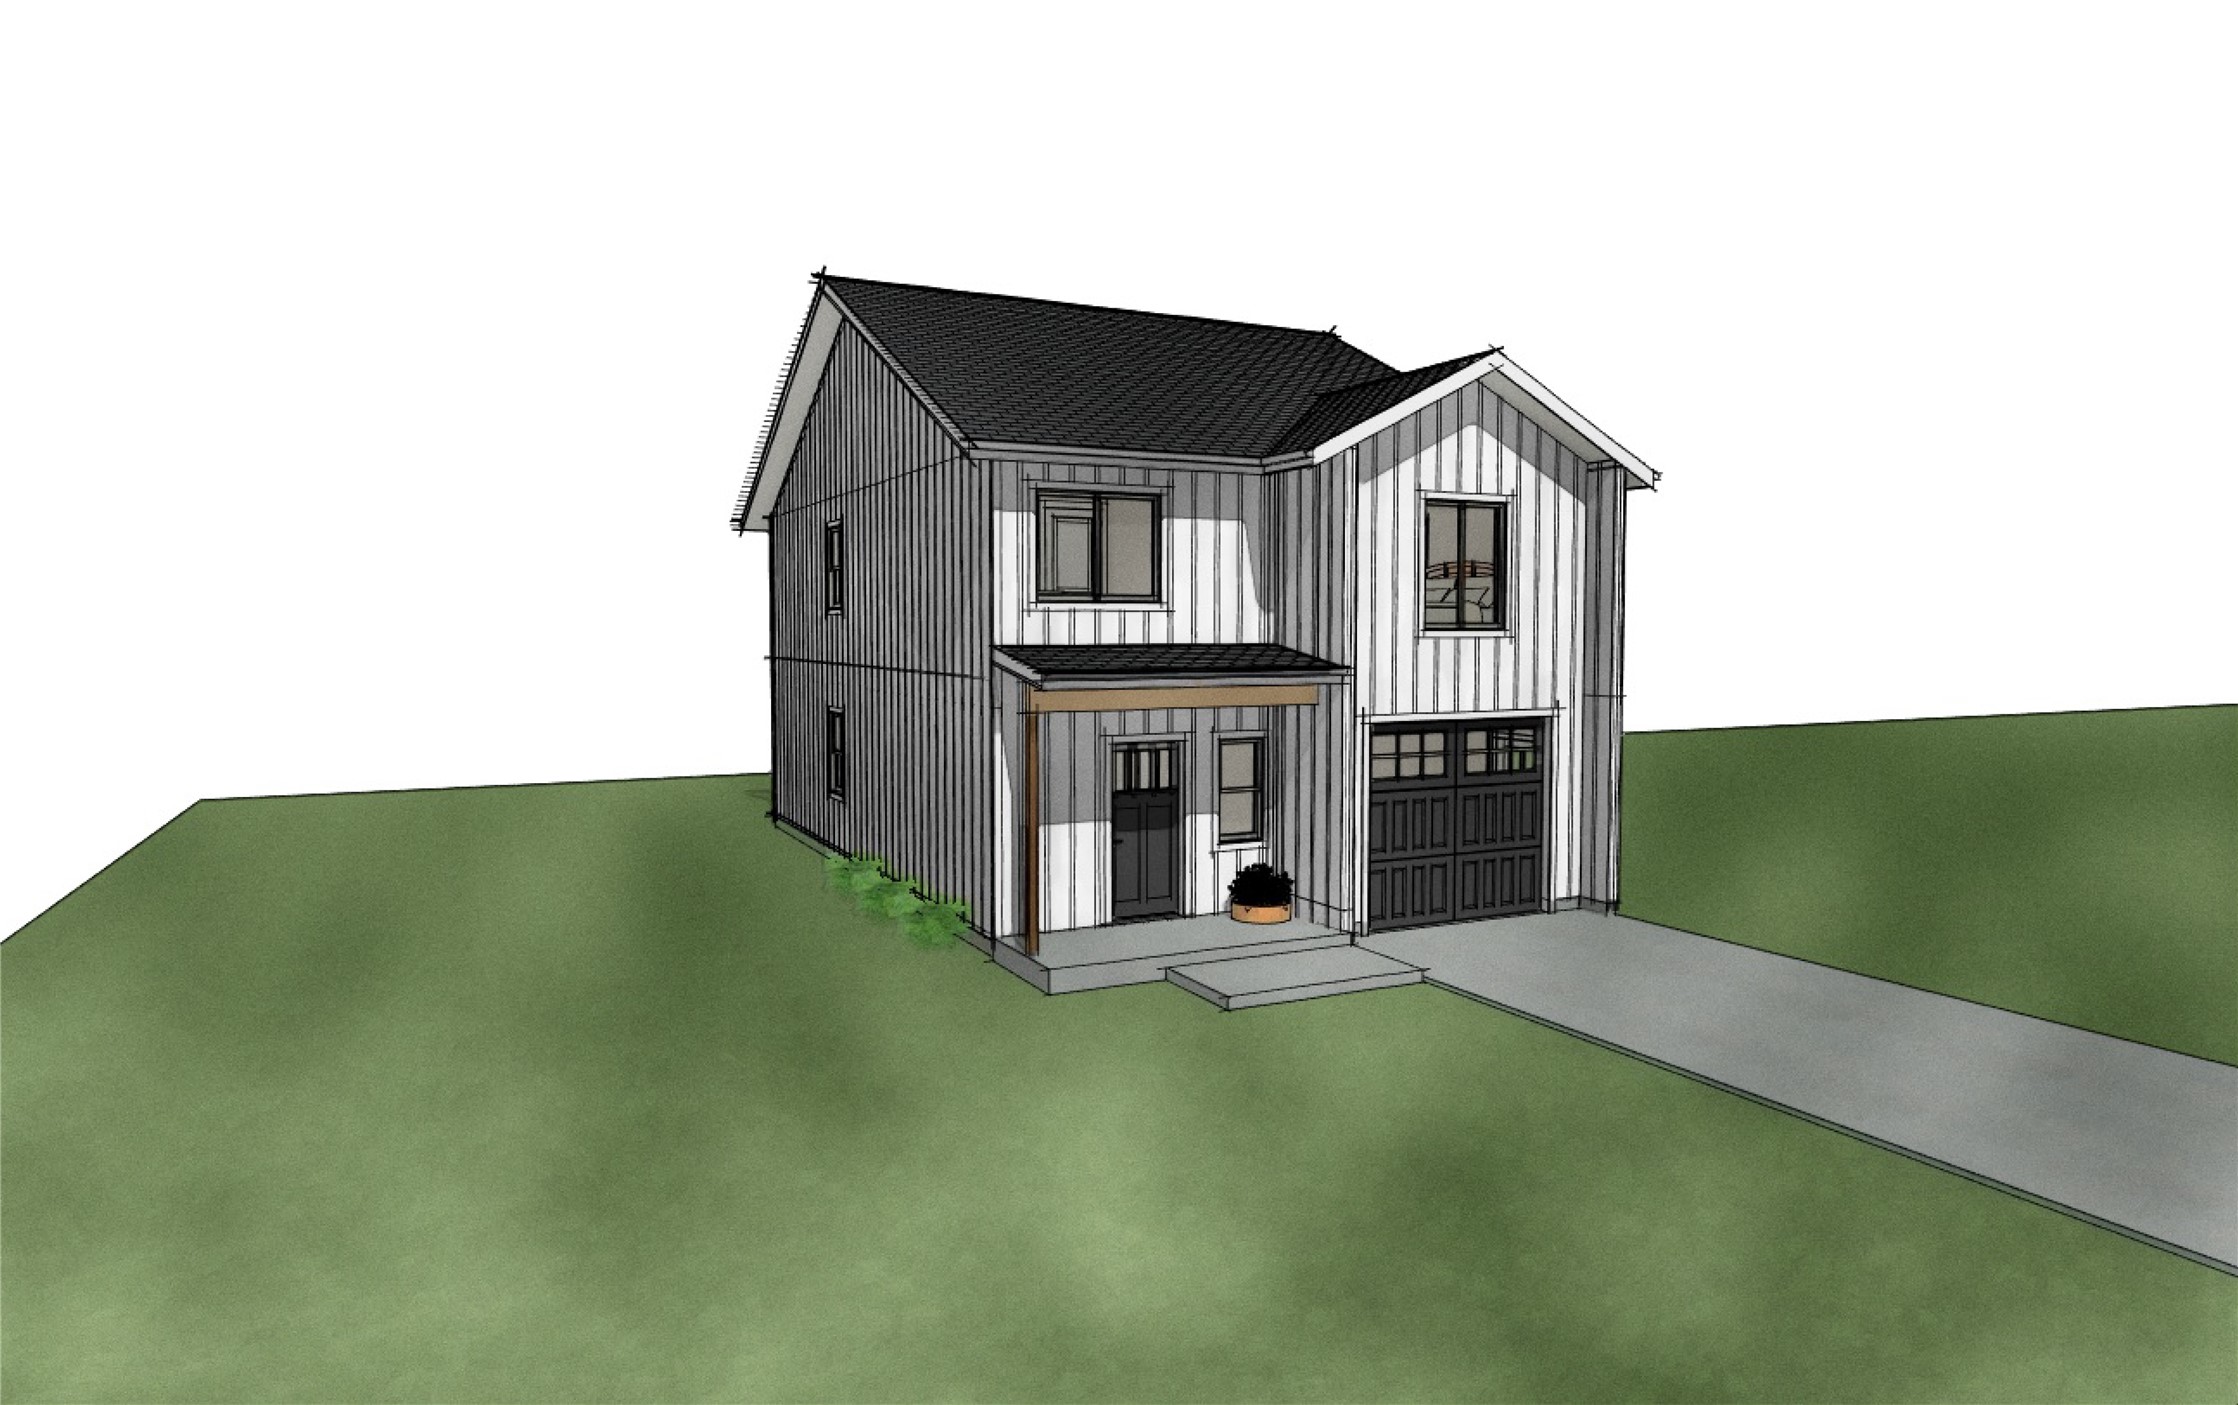 To be built home in The Preserve Subdivision! Easy access to the bypass and only minutes from FVCC, Logan Health, and Kalispell's major shopping areas. This Zeta floor plan has 1,543SF with 3 beds, 2.5 baths and open floor plan with modern finishes. House also has an attached garage & underground sprinklers. The Preserve is part of the established Meadows Edge Subdivision which offers walking trails, dog park, and play ground all within close distance to the home. Contact Cecil Waatti 406.890.4000 Layne Massie 406.270.6664 or your real estate professional.